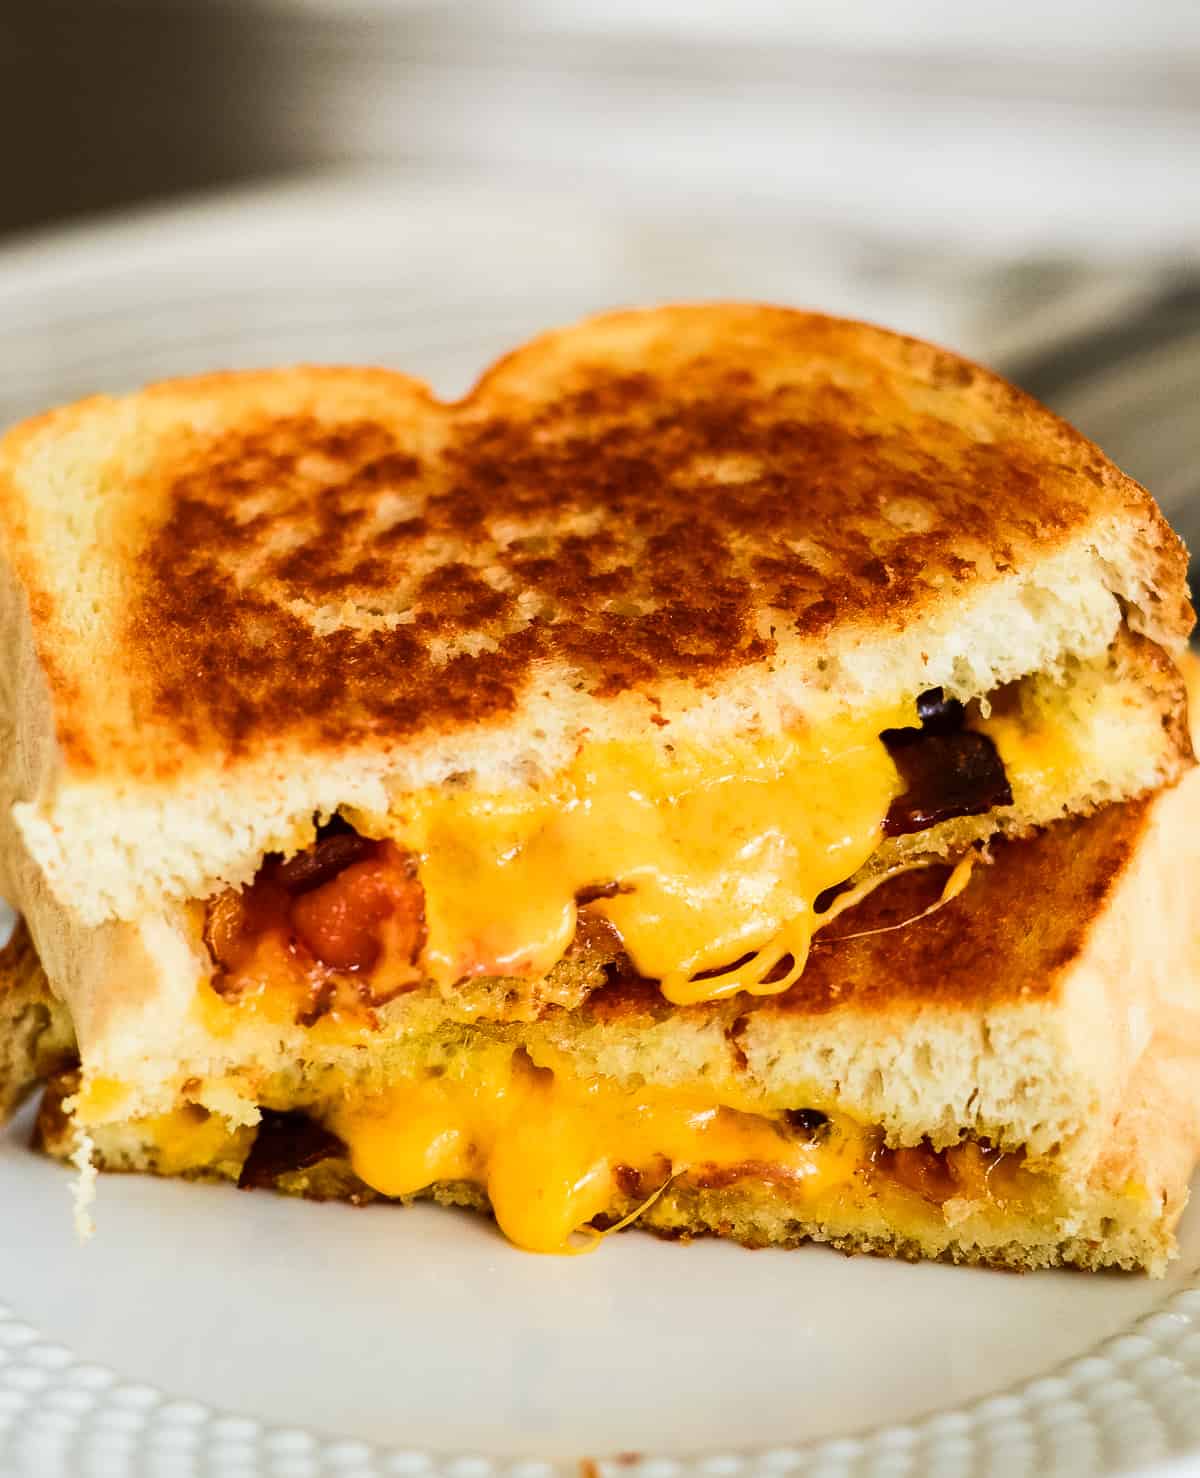 grilled sandwich with bacon and cheese